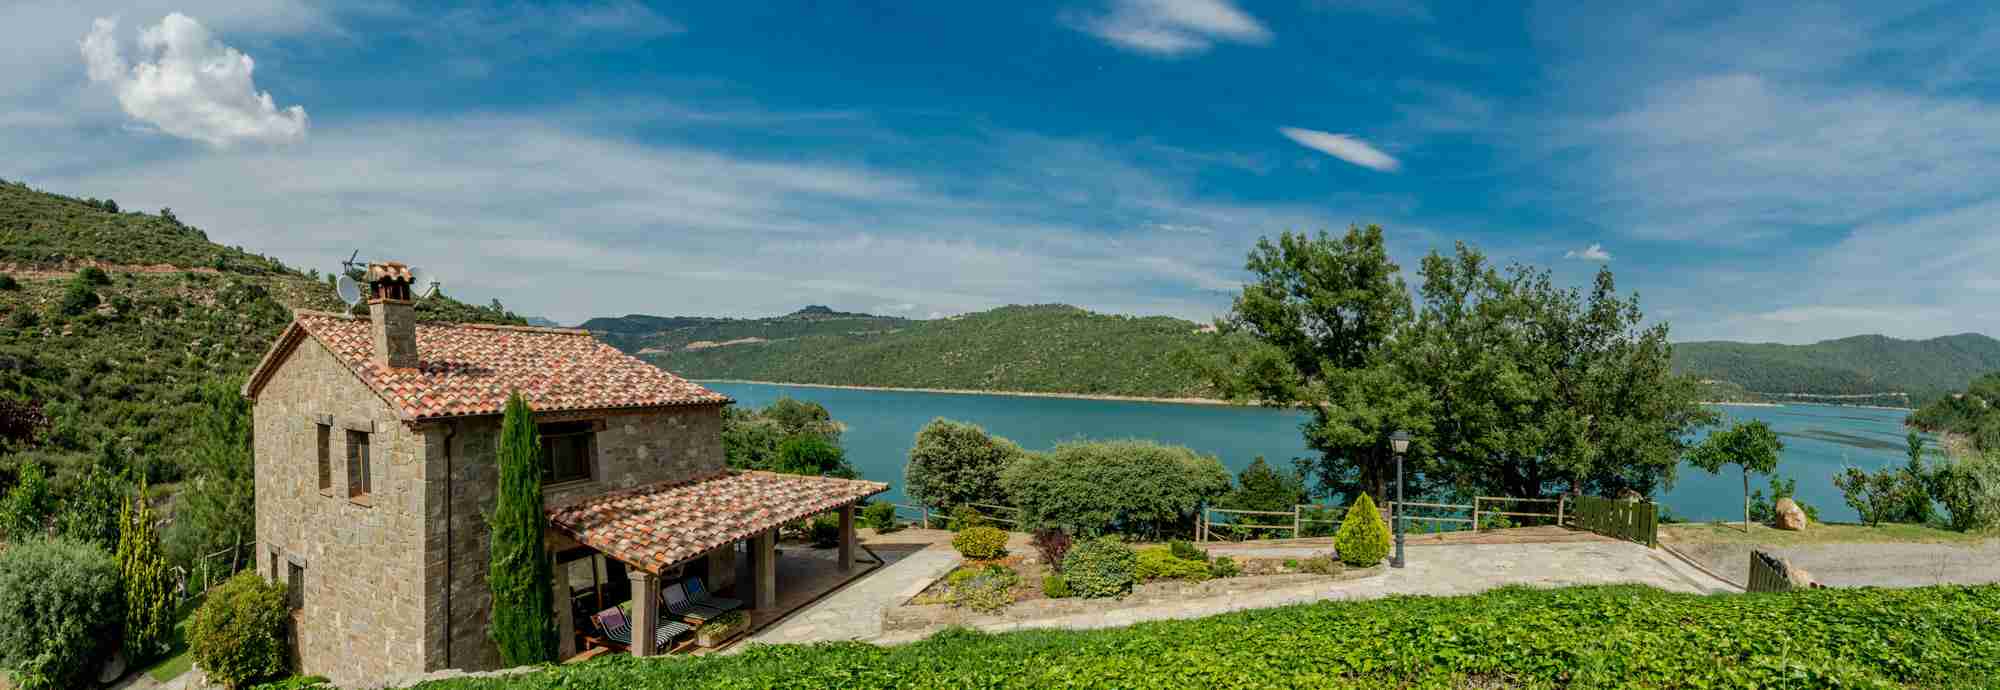 Fabulous 3 bed lakeside finca for swimming and walking in Catalonia